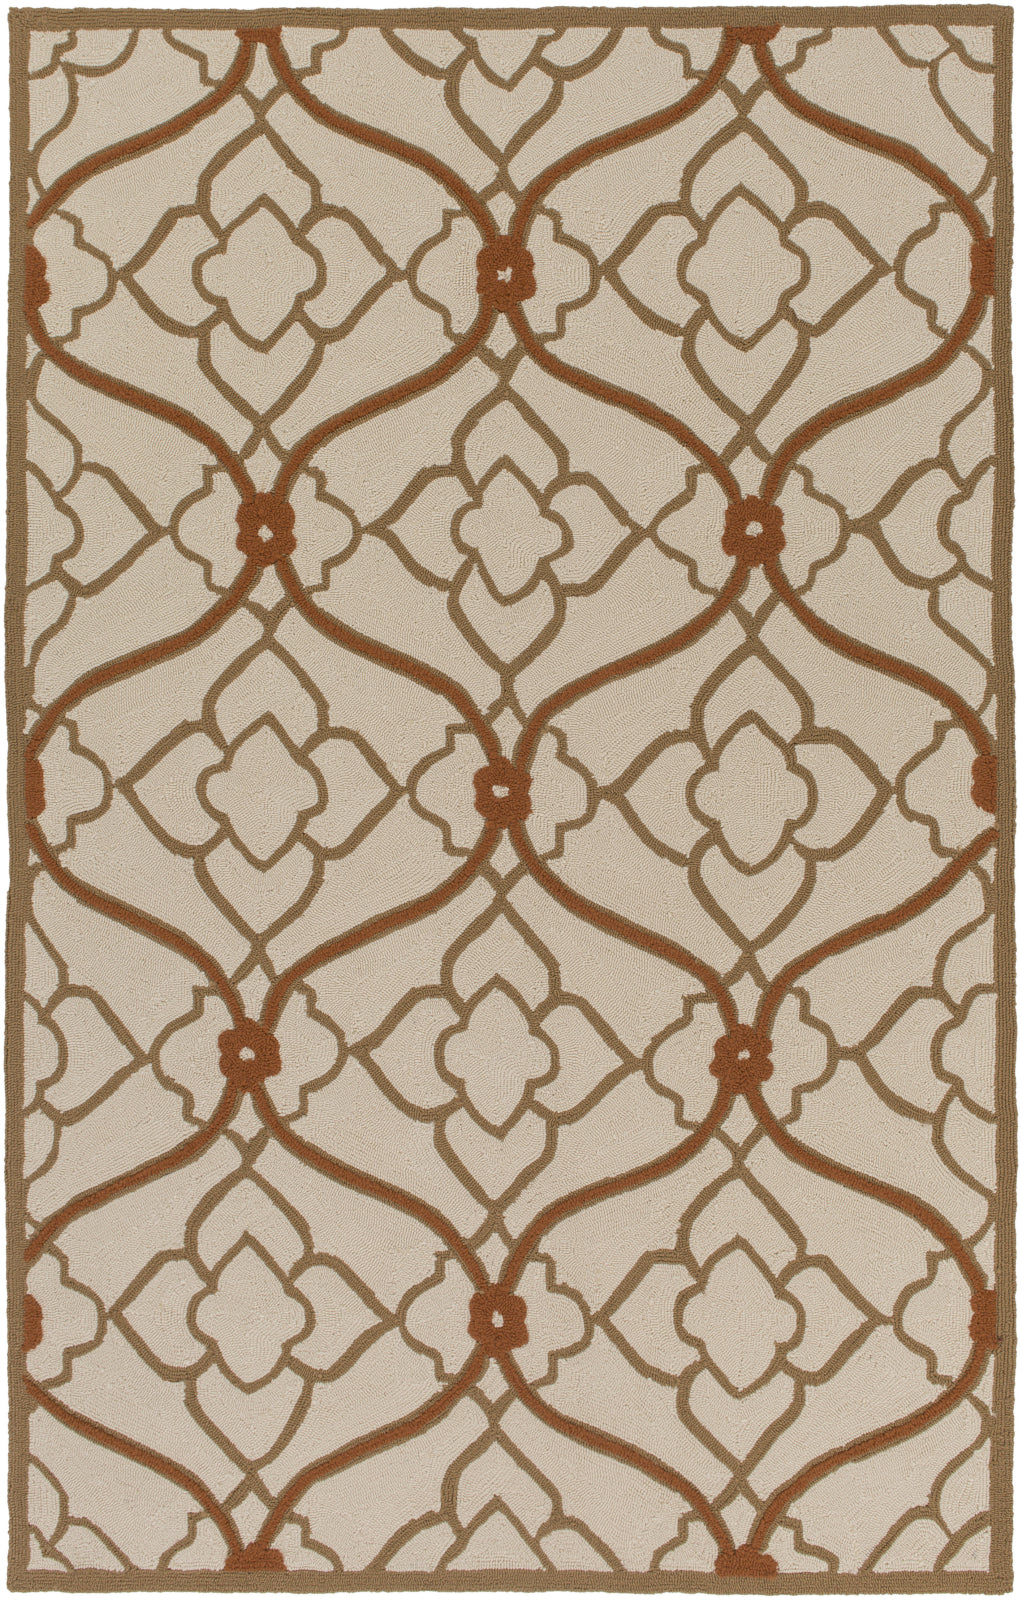 Surya Courtyard CTY-4001 Area Rug by Candice Olson